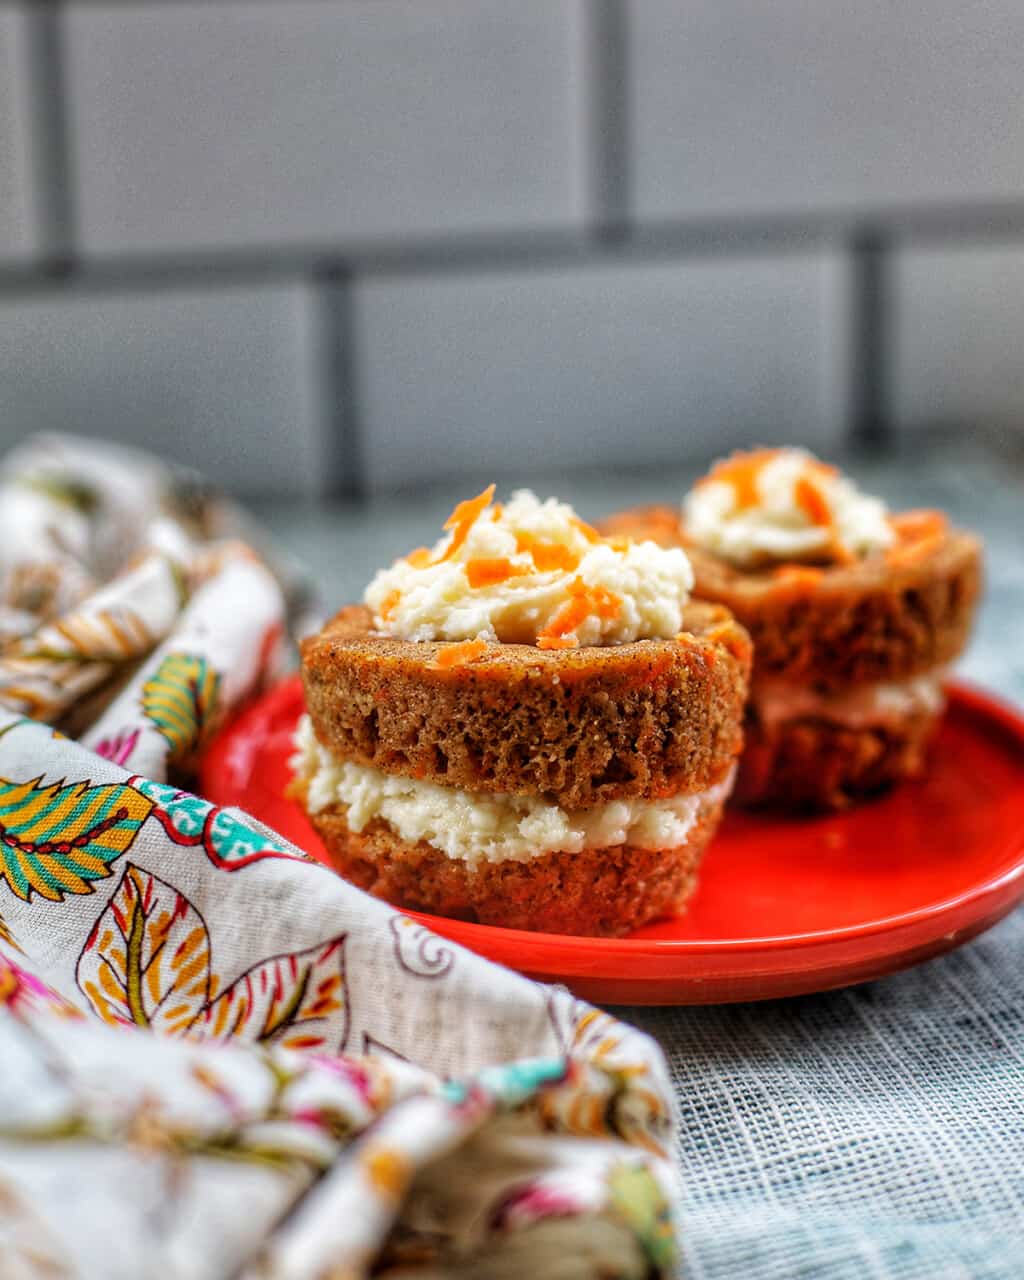 microwave carrot cakes with cream cheese frosting